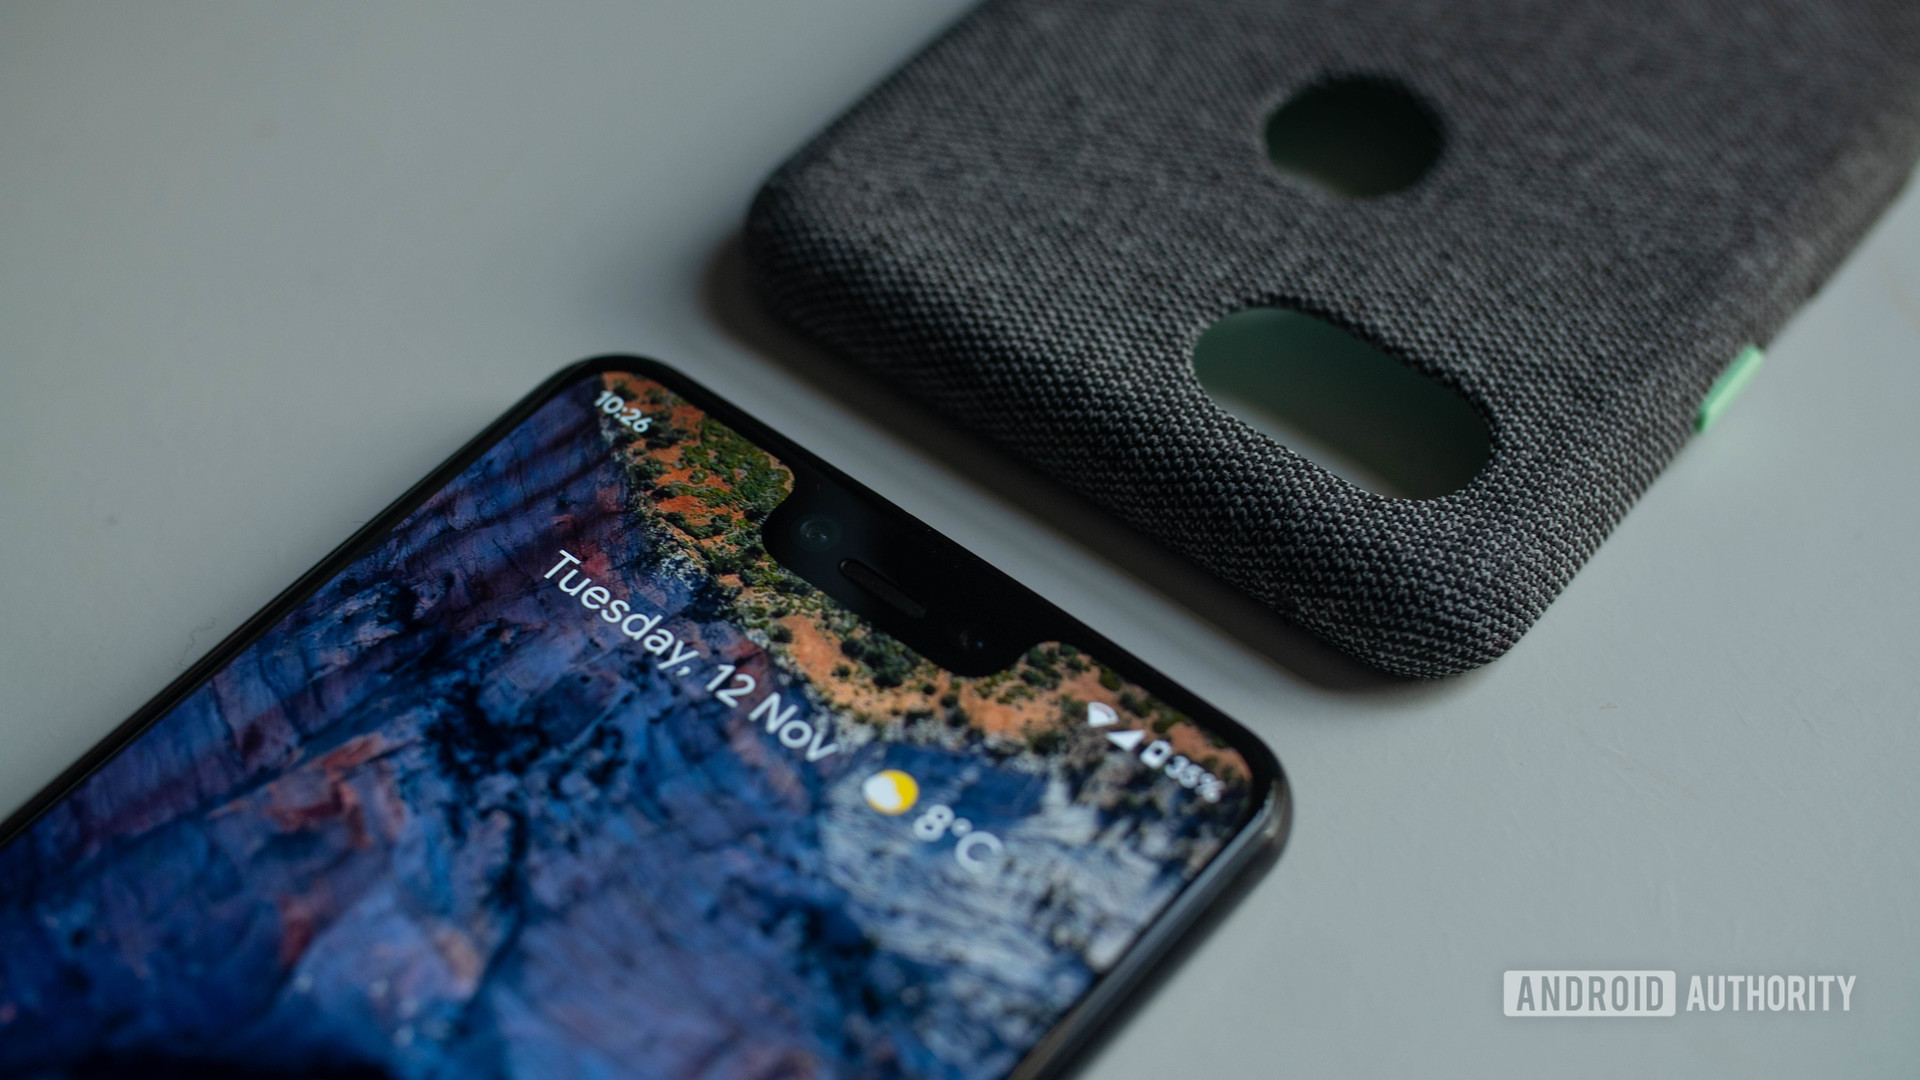 Pixel 3 XL product photo flat lay on home screen with case